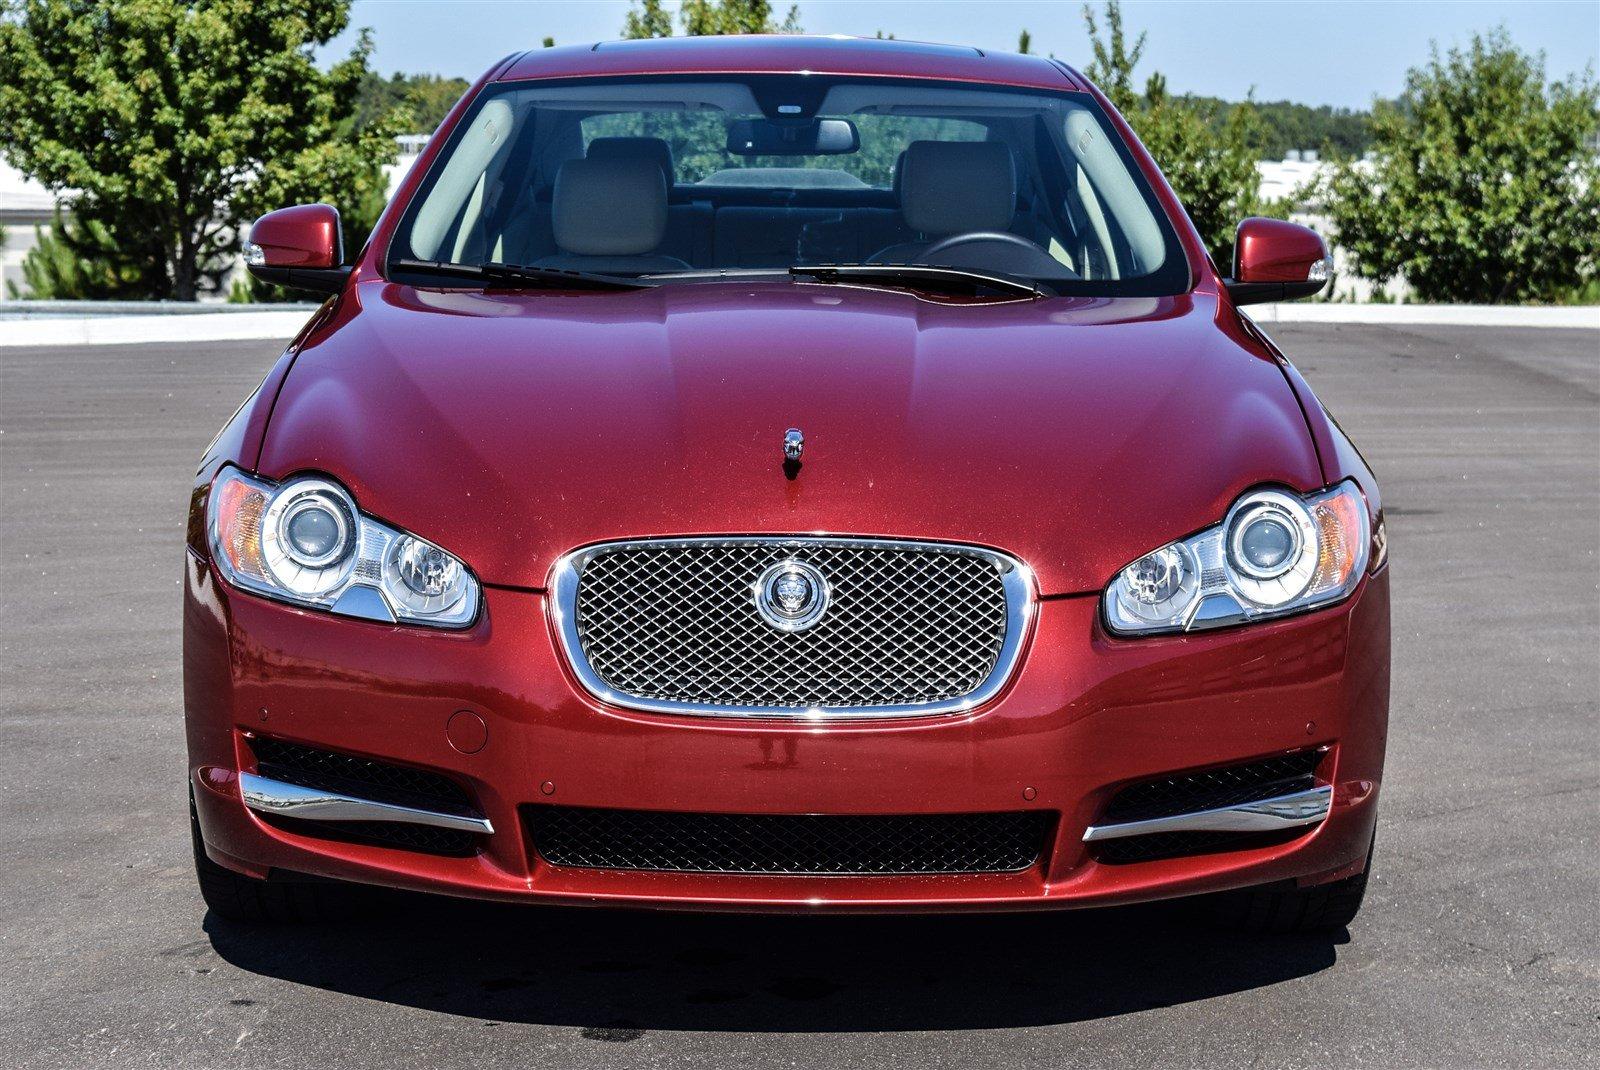 Used 2009 Jaguar XF Supercharged for sale Sold at Gravity Autos Marietta in Marietta GA 30060 4